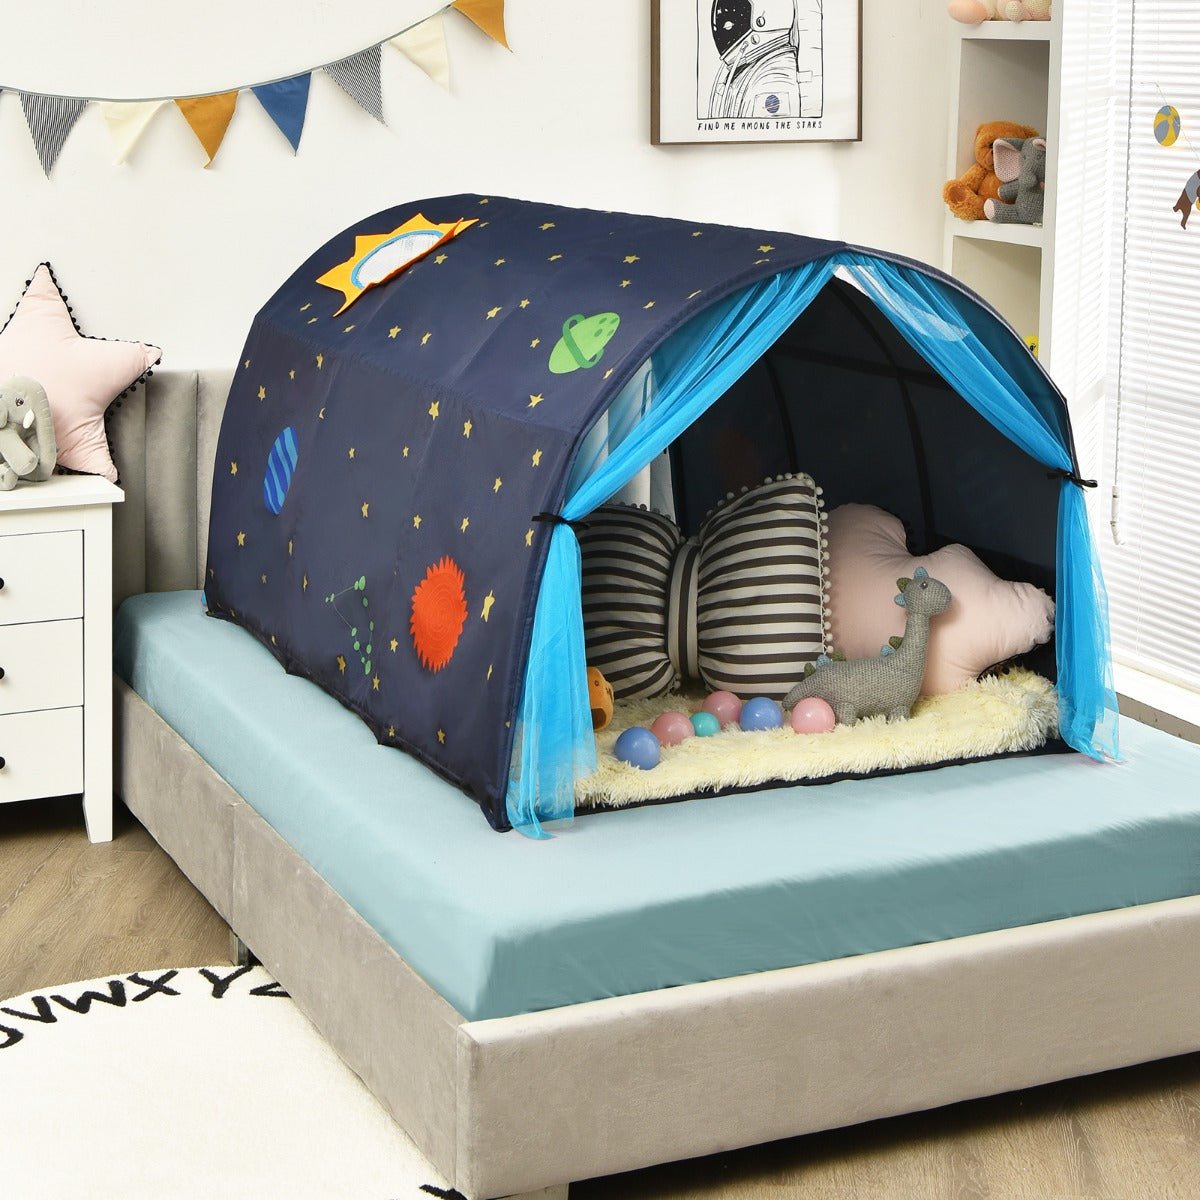 Cozy Kids Twin Sleeping Tent: Adventure Awaits with Carry Bag